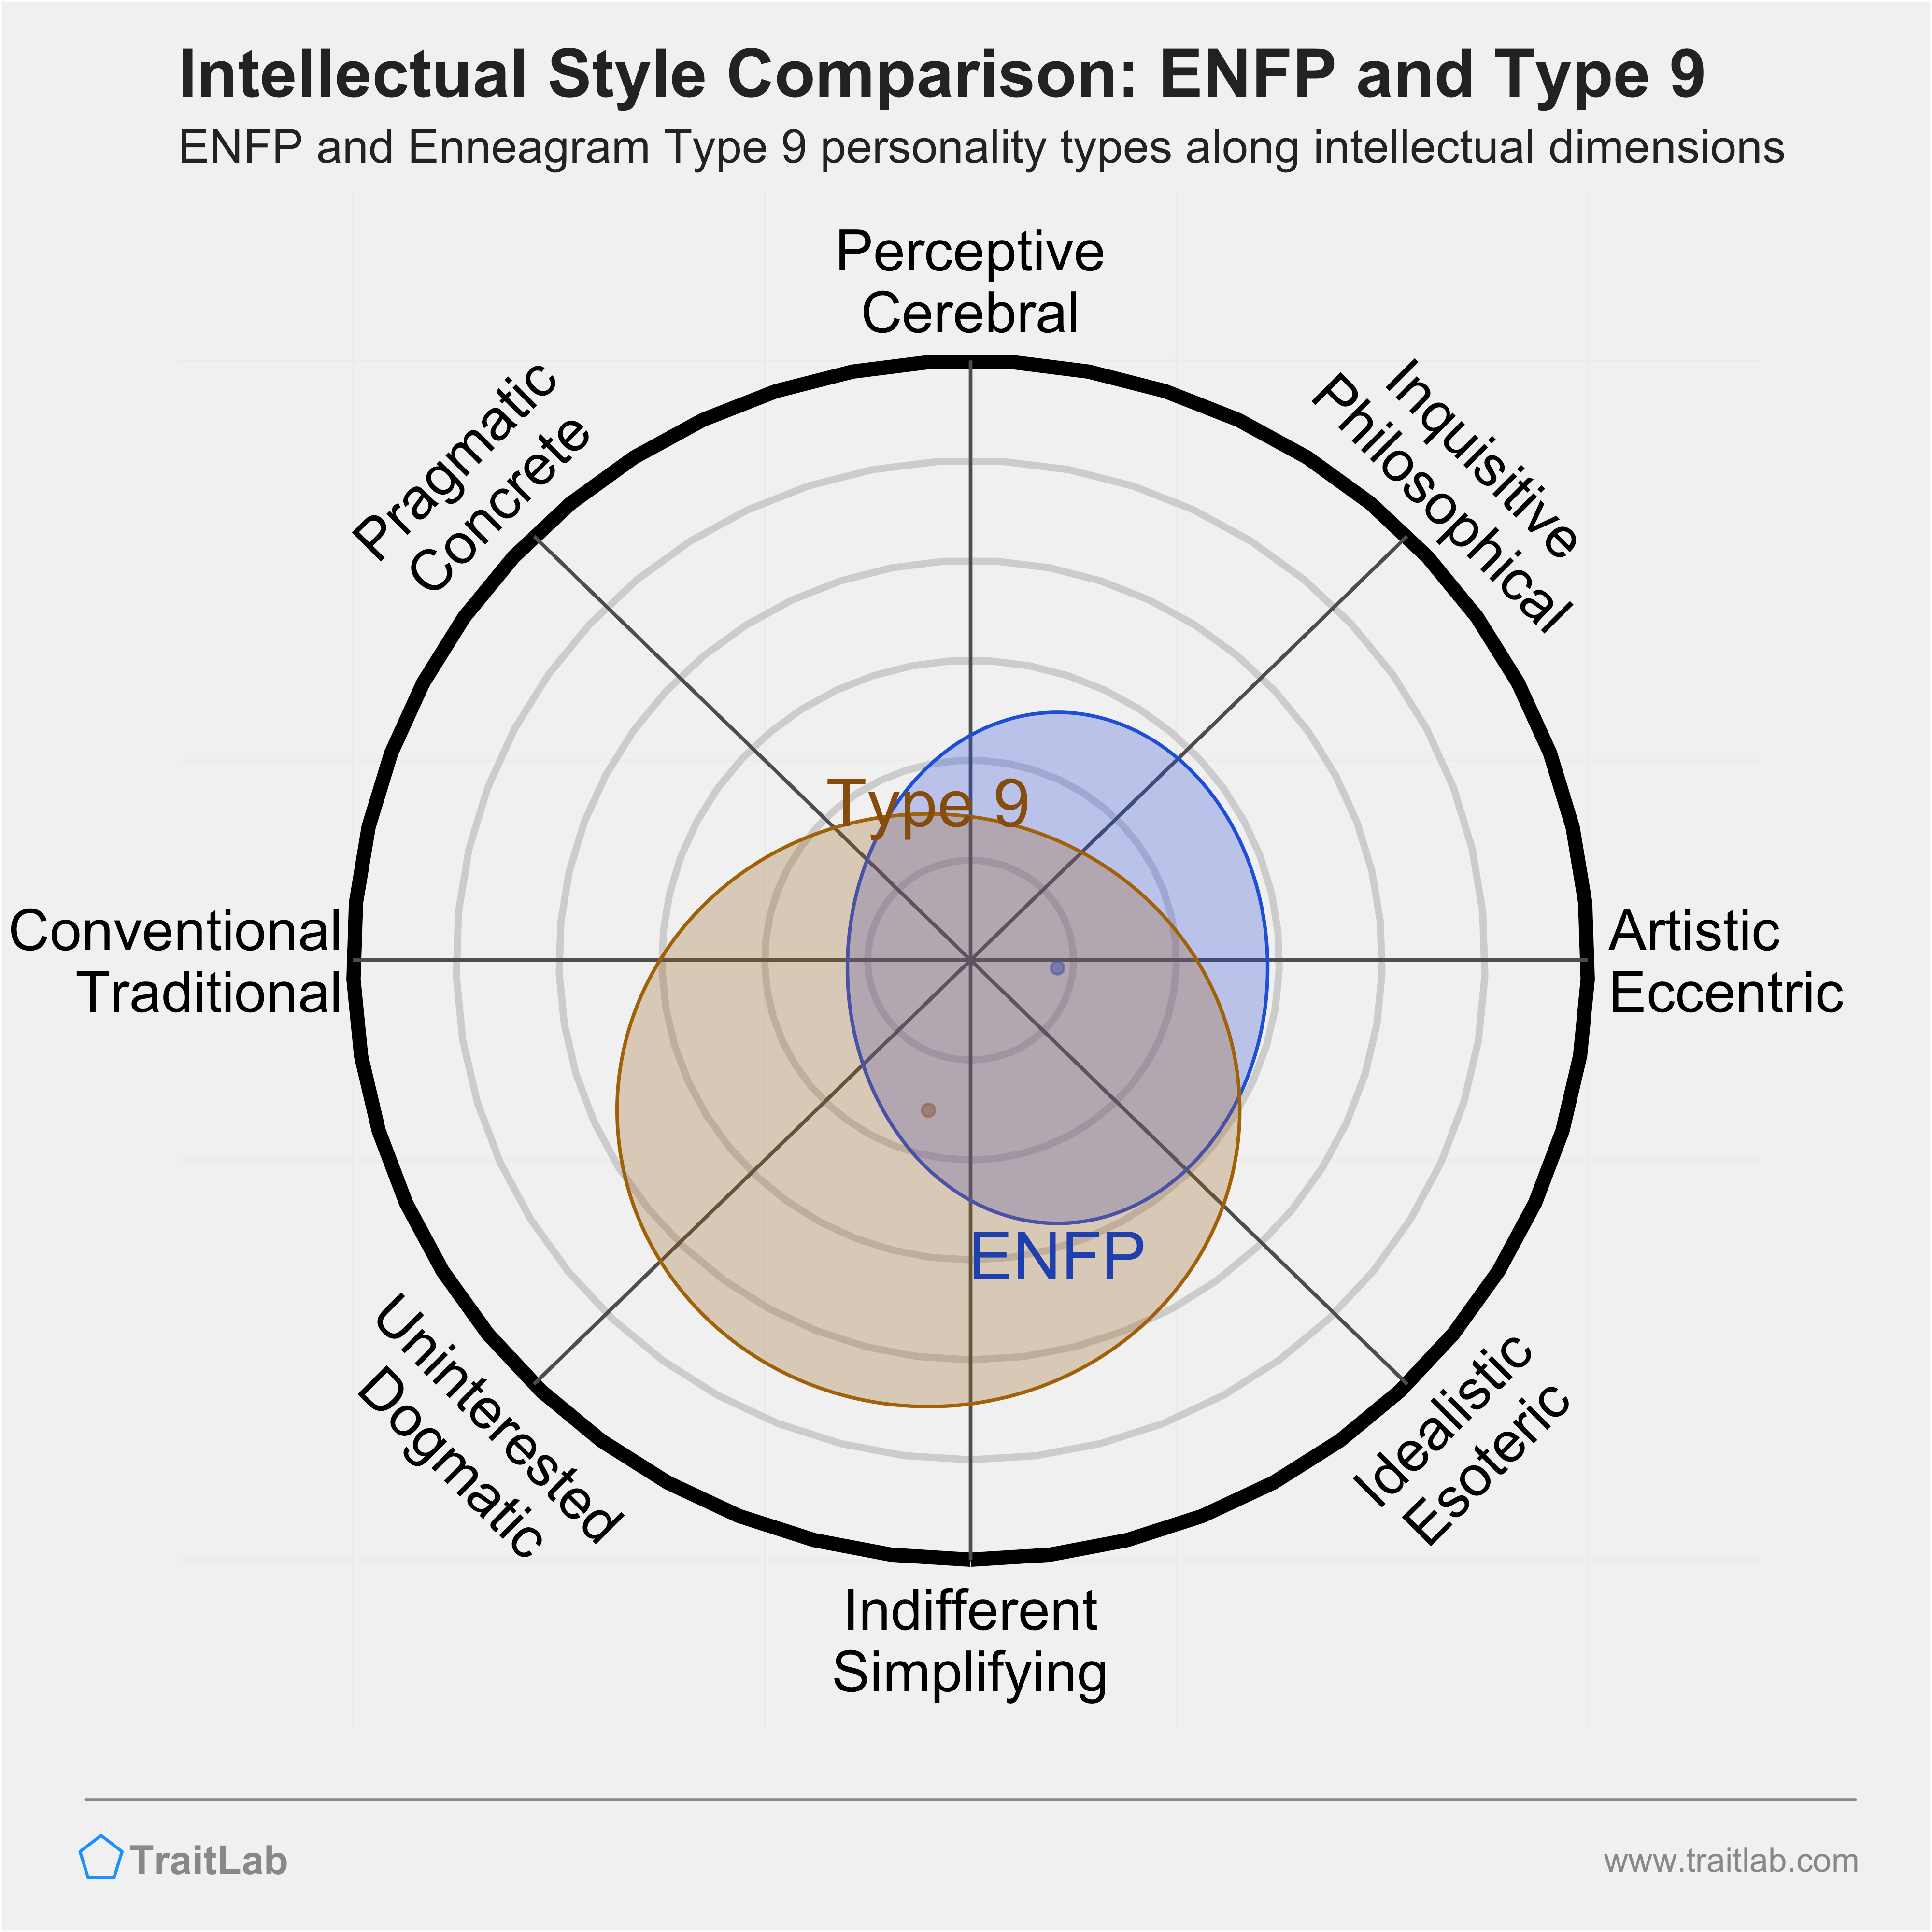 ENFP and Type 9 comparison across intellectual dimensions